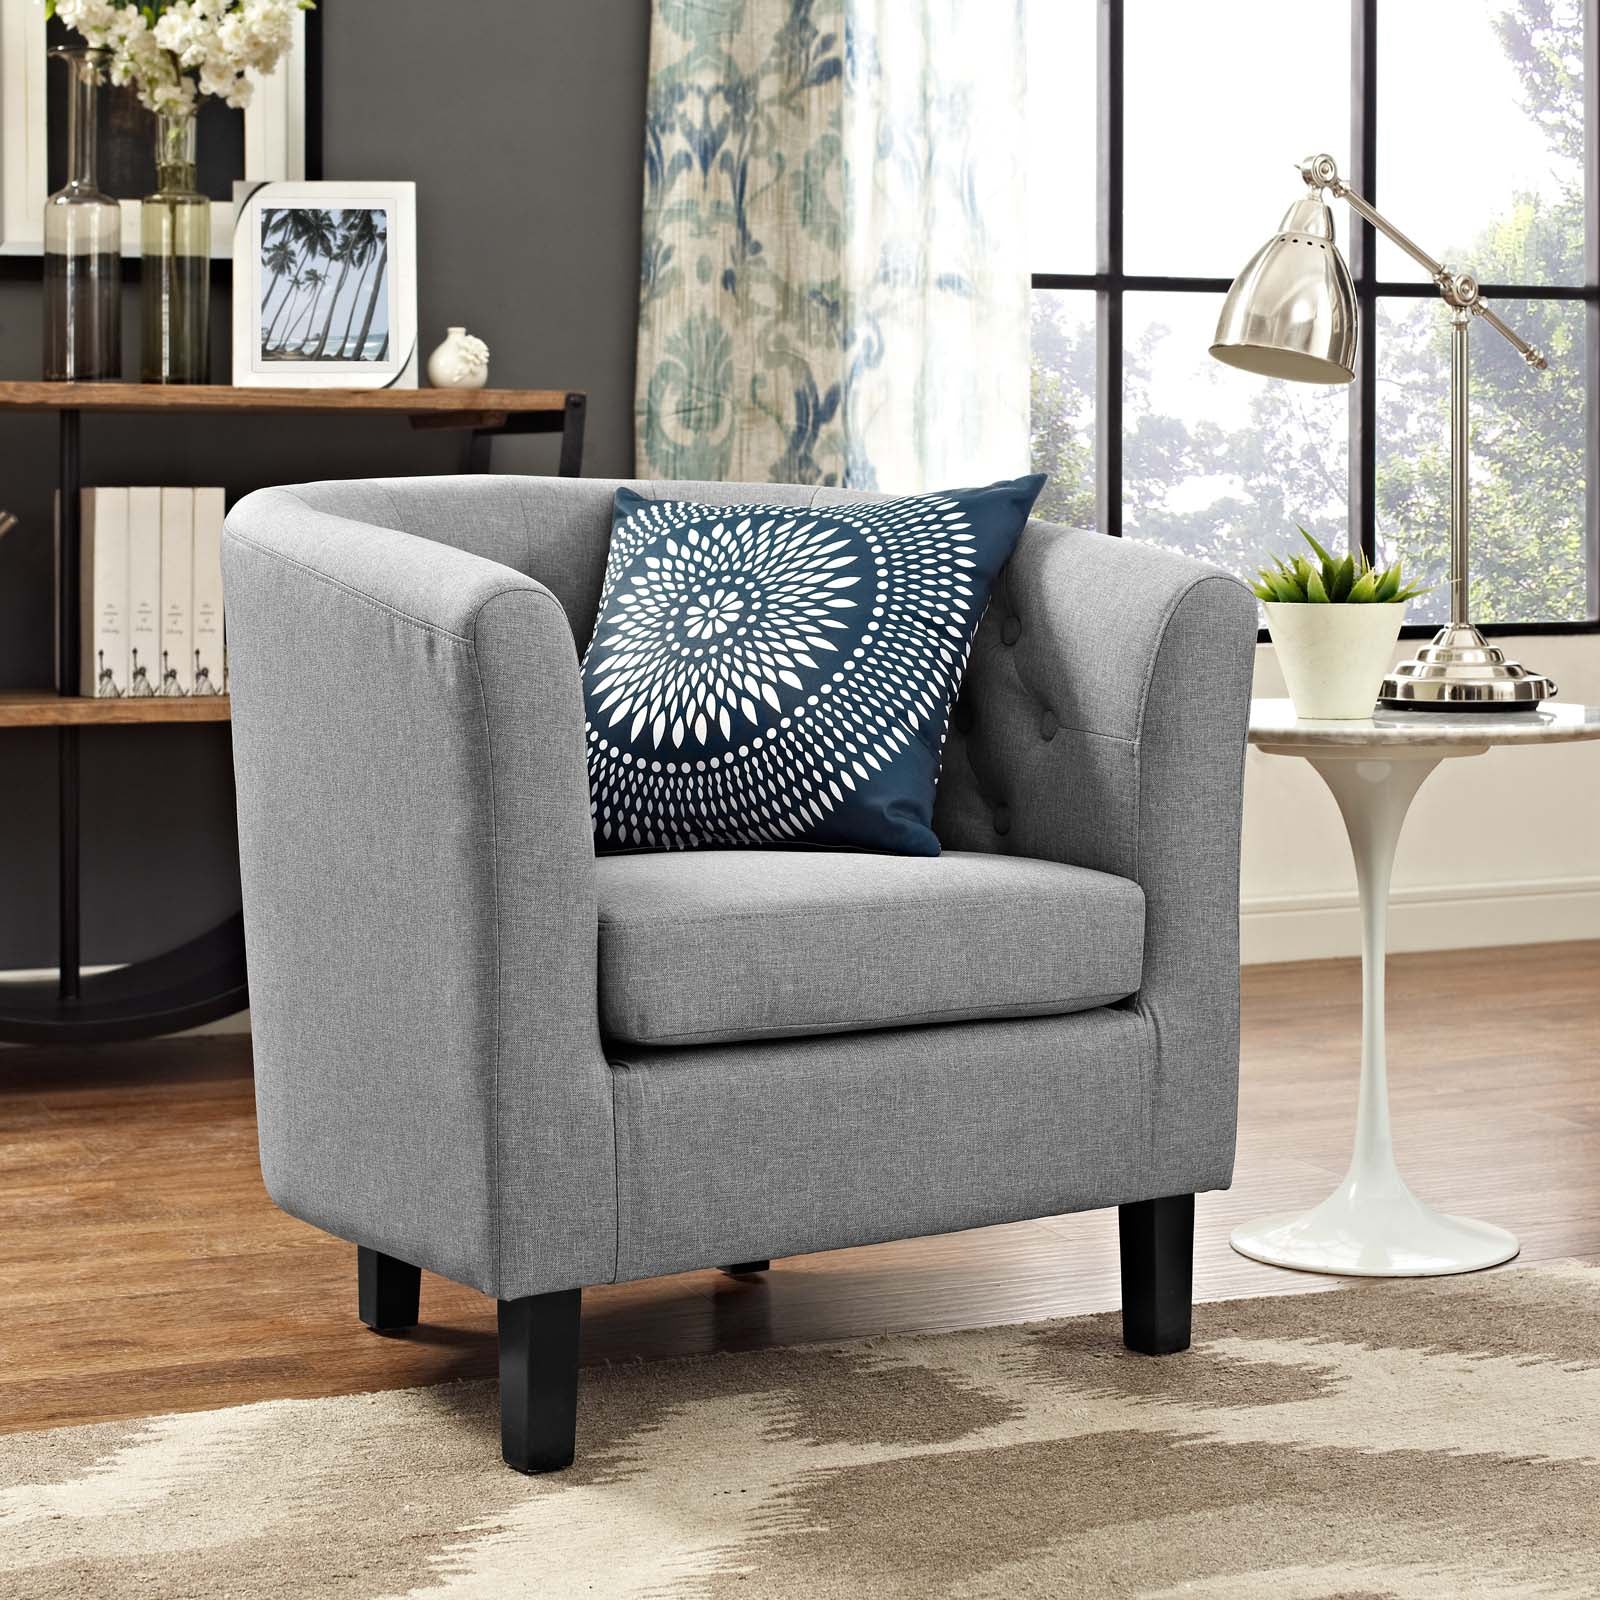 Modway Chairs - Prospect Upholstered Fabric Armchair Light Gray